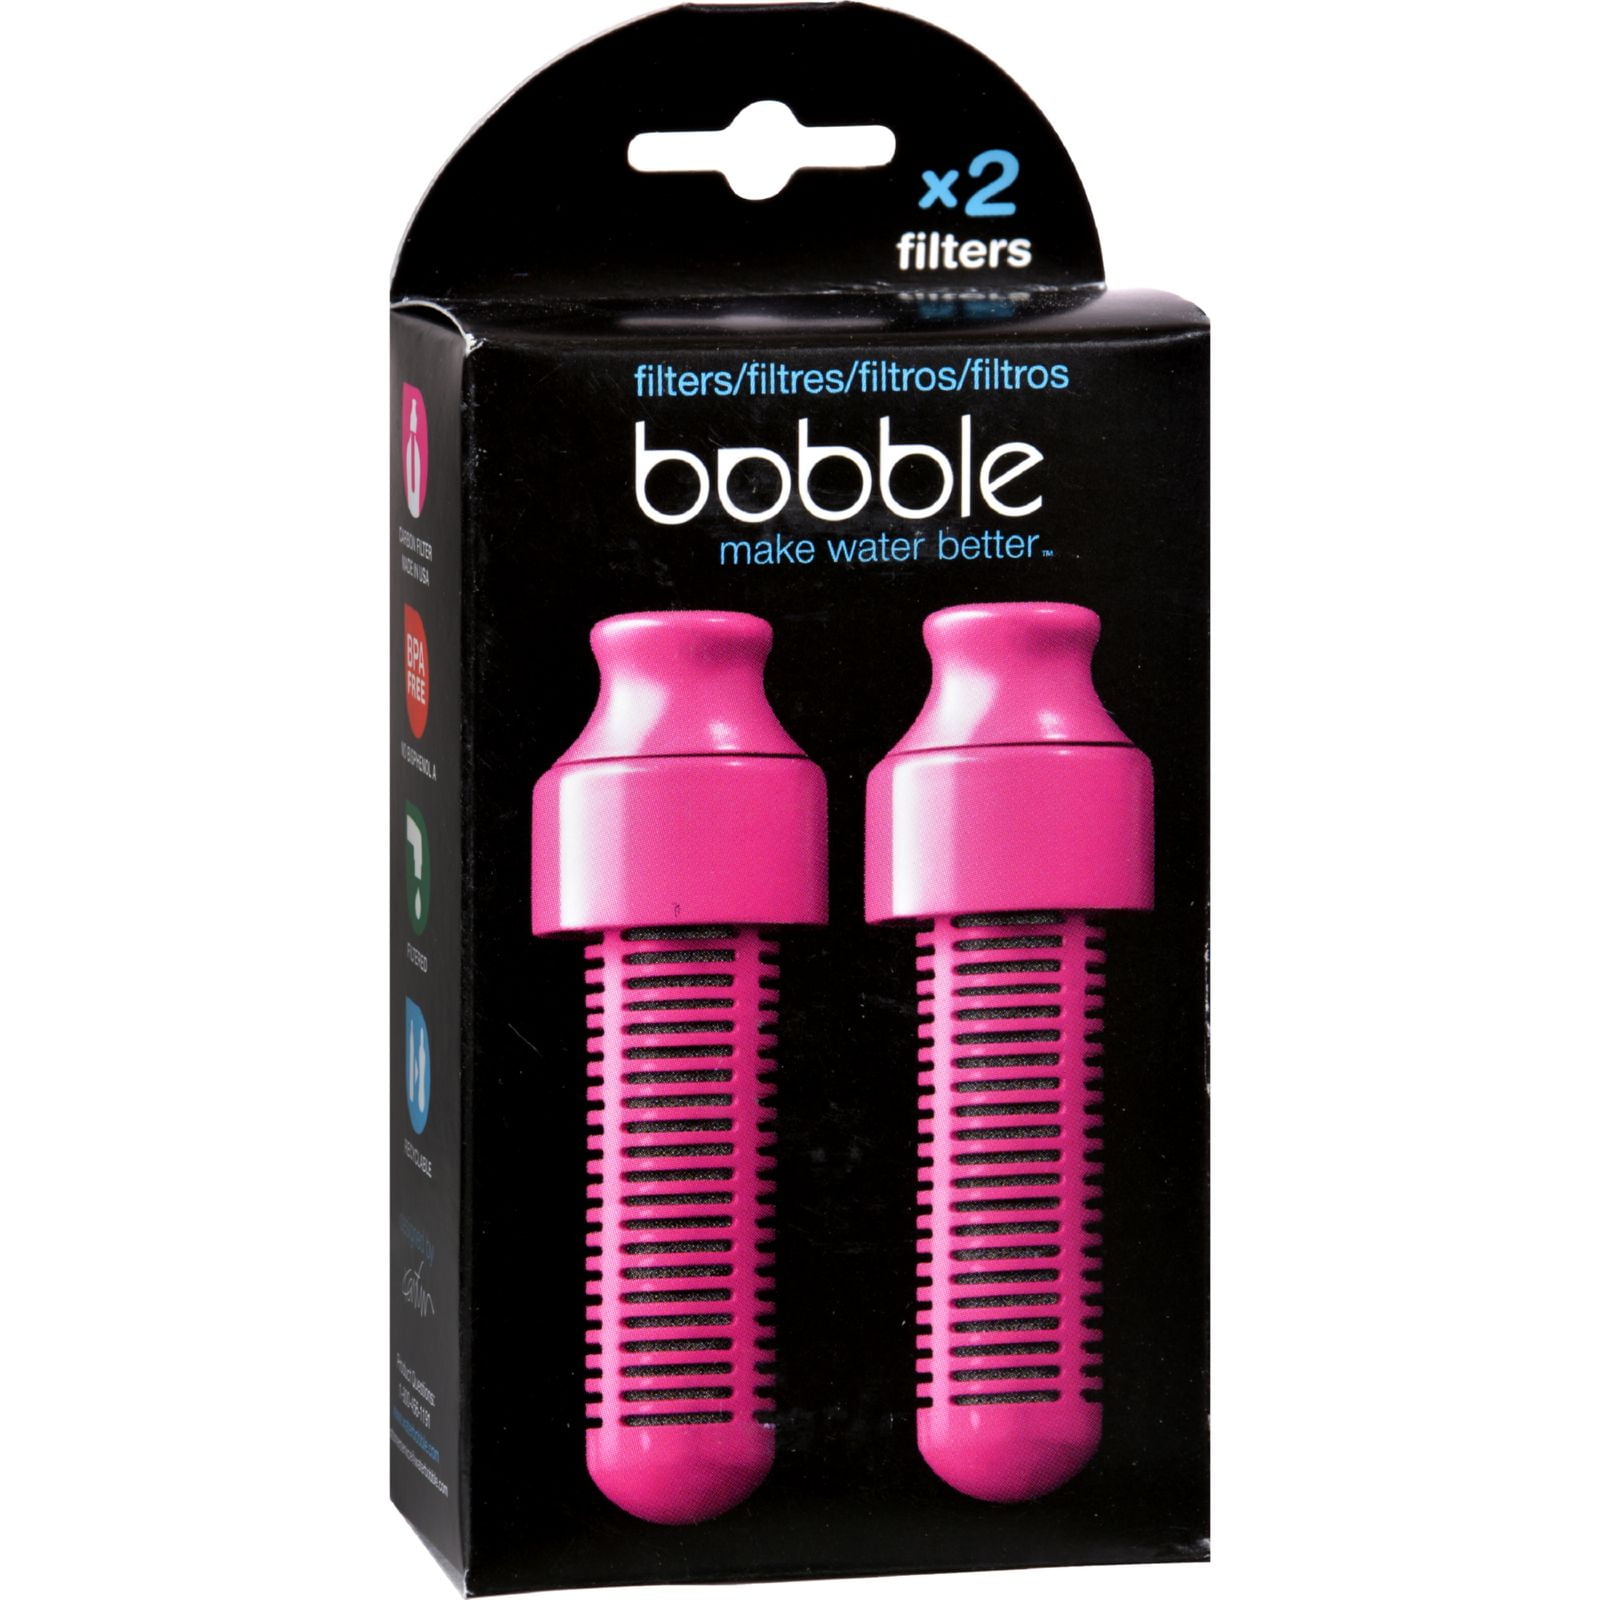 Bobble Carbon Replacement Filter for Bobble Plus Replacement Filter